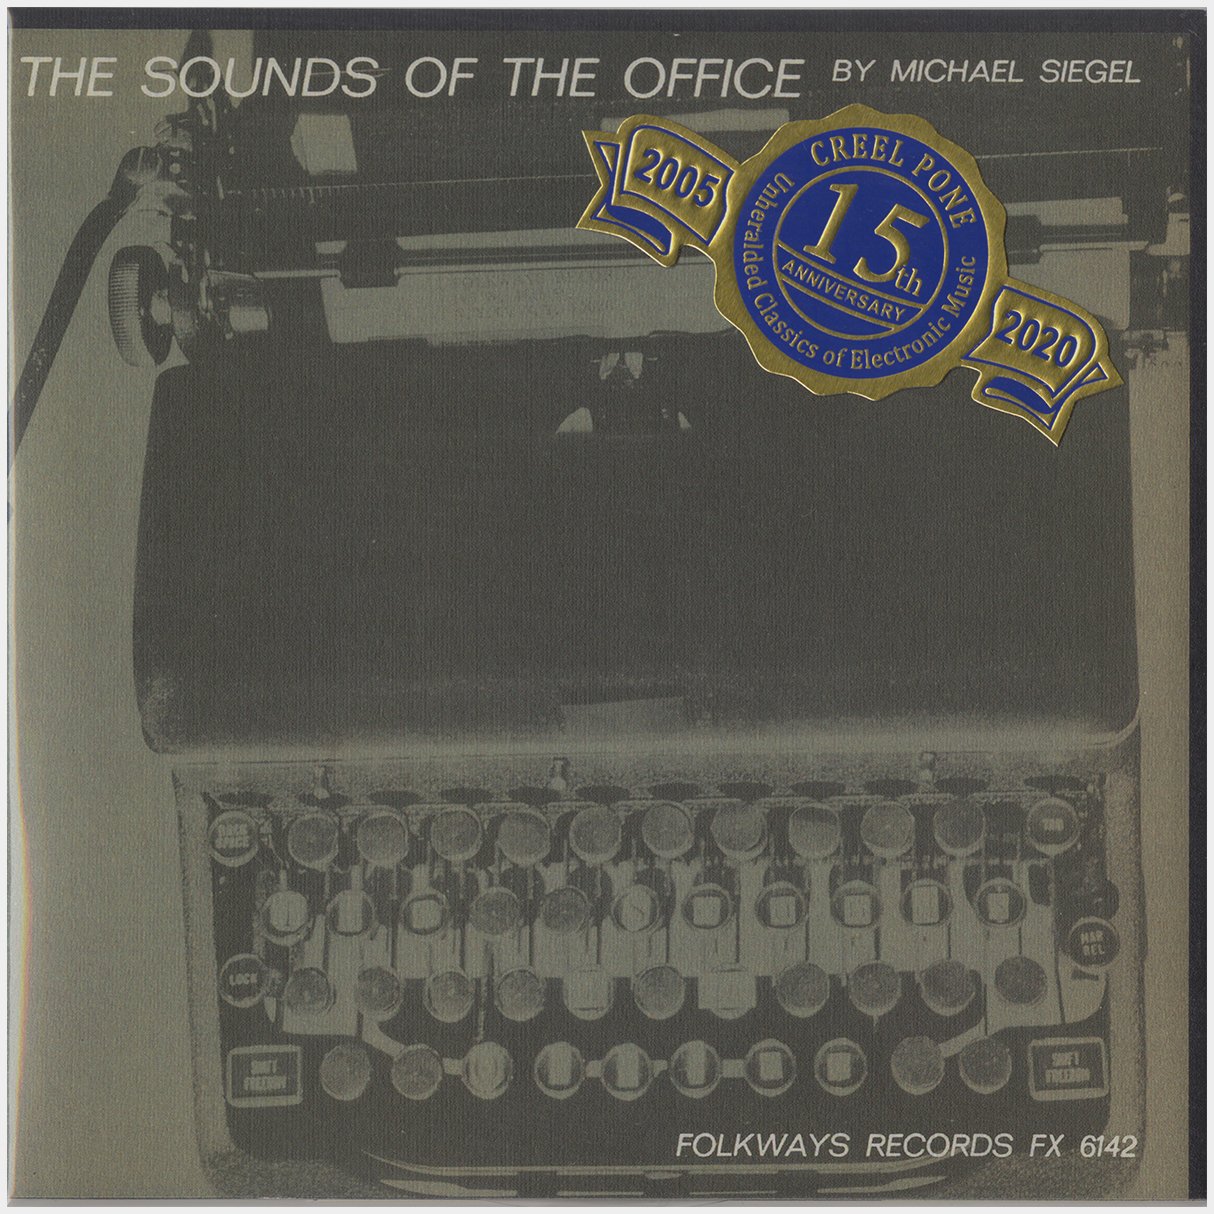 [CP 000.11 CD] Michael Siegel; The Sounds of the Office, The Sounds of the Junk Yard